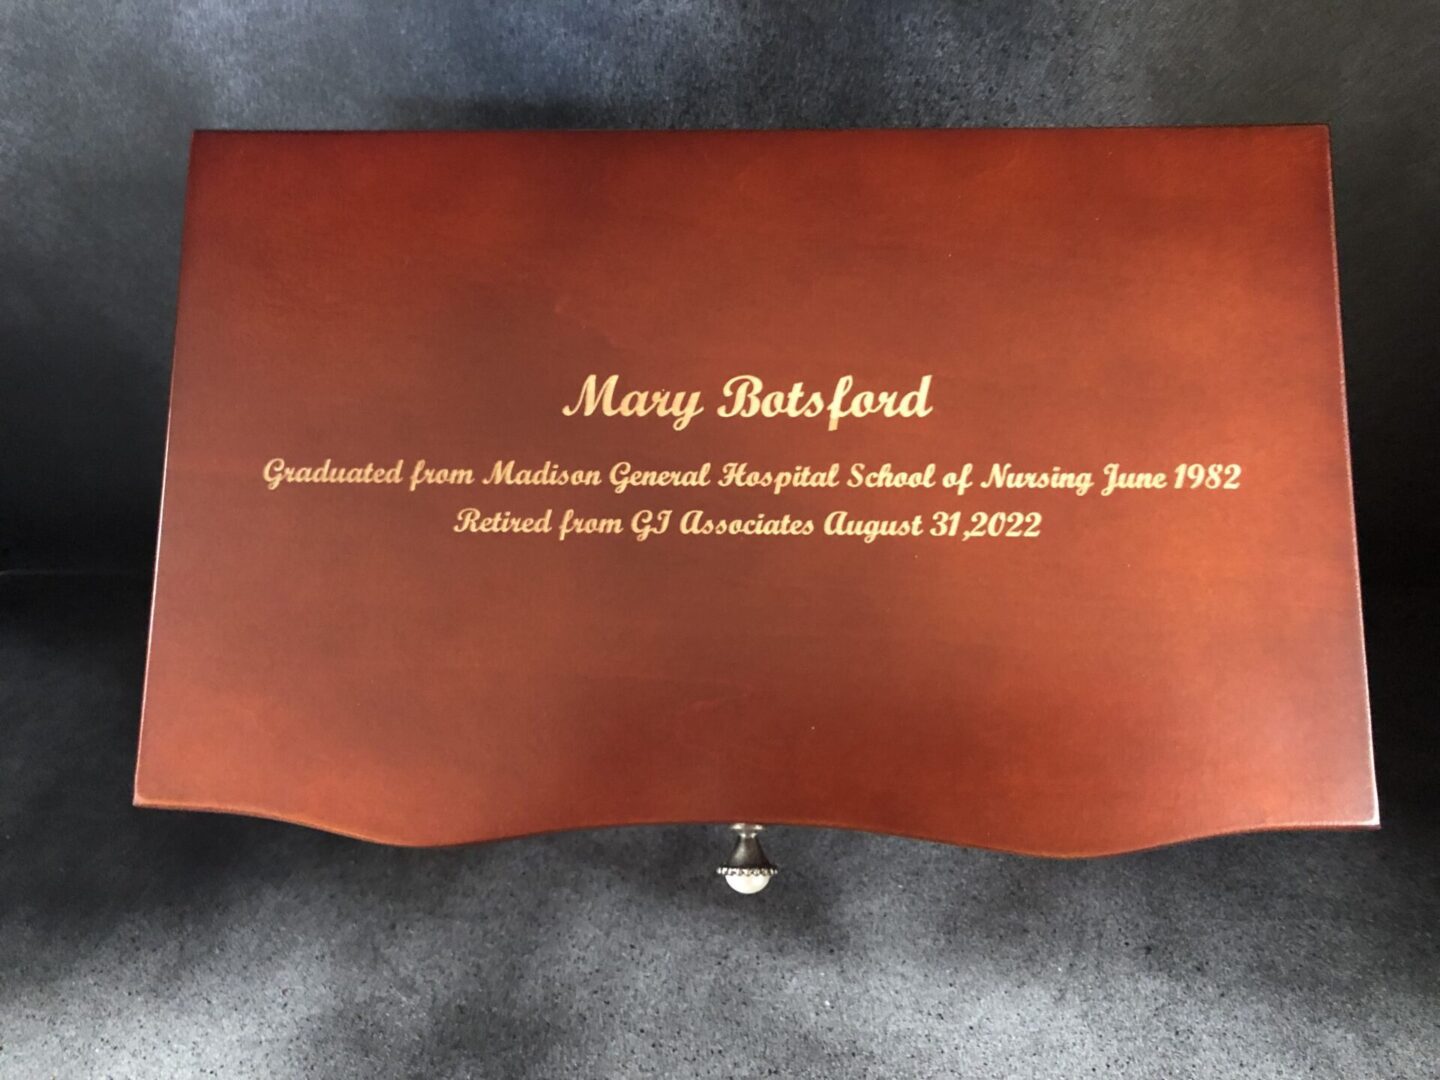 A wooden box with the name of mary bedford engraved on it.